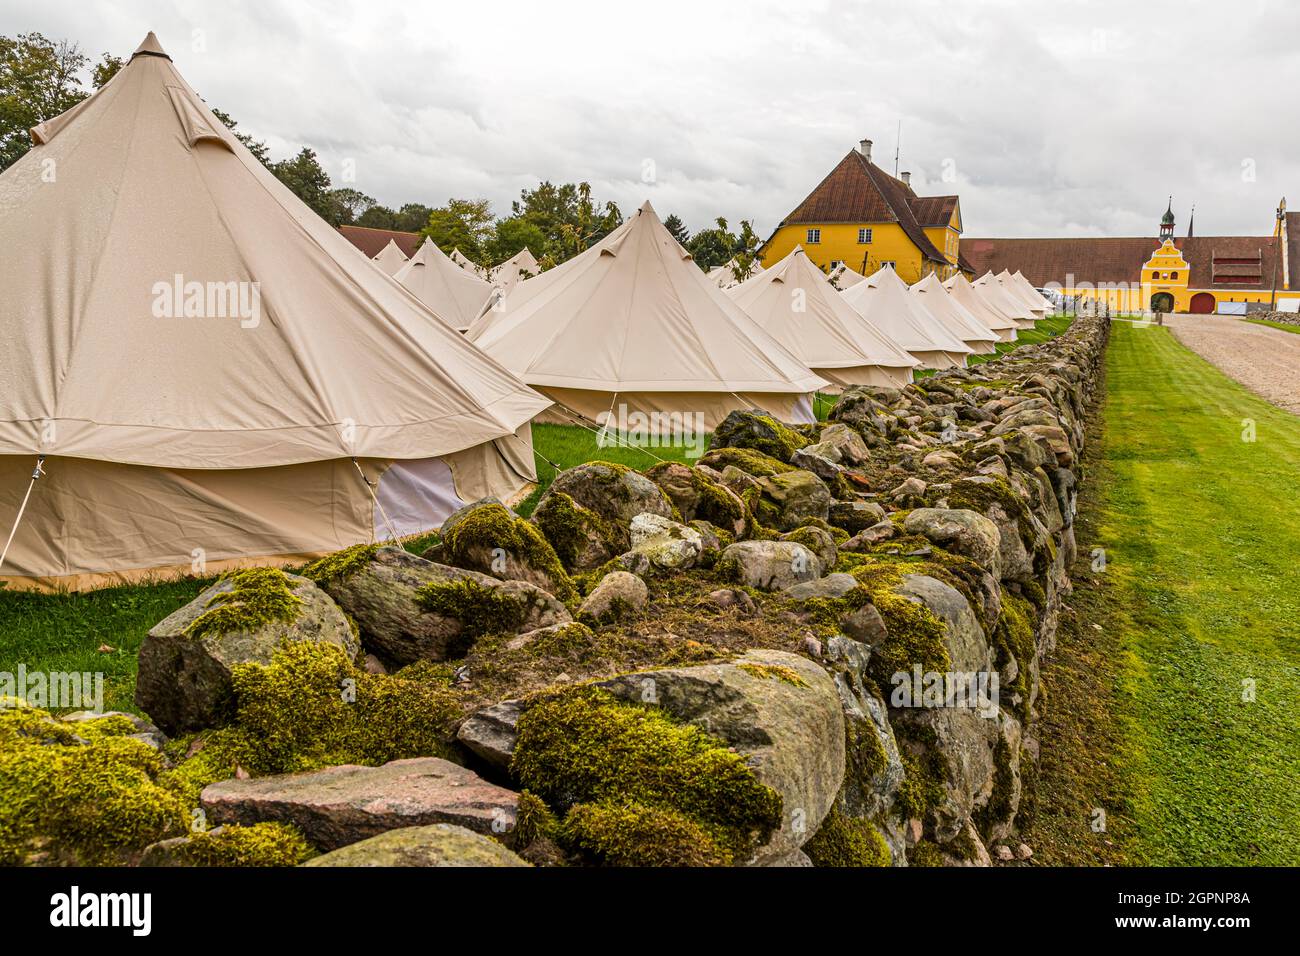 Festival in glamping tents at Brahetrolleborg Castle Skov and Landbrug near Faaborg-Midtfyn, Denmark. The audience has been invited by three big Danish Companies. The public had no access to the three closed events in September 2021. Stock Photo